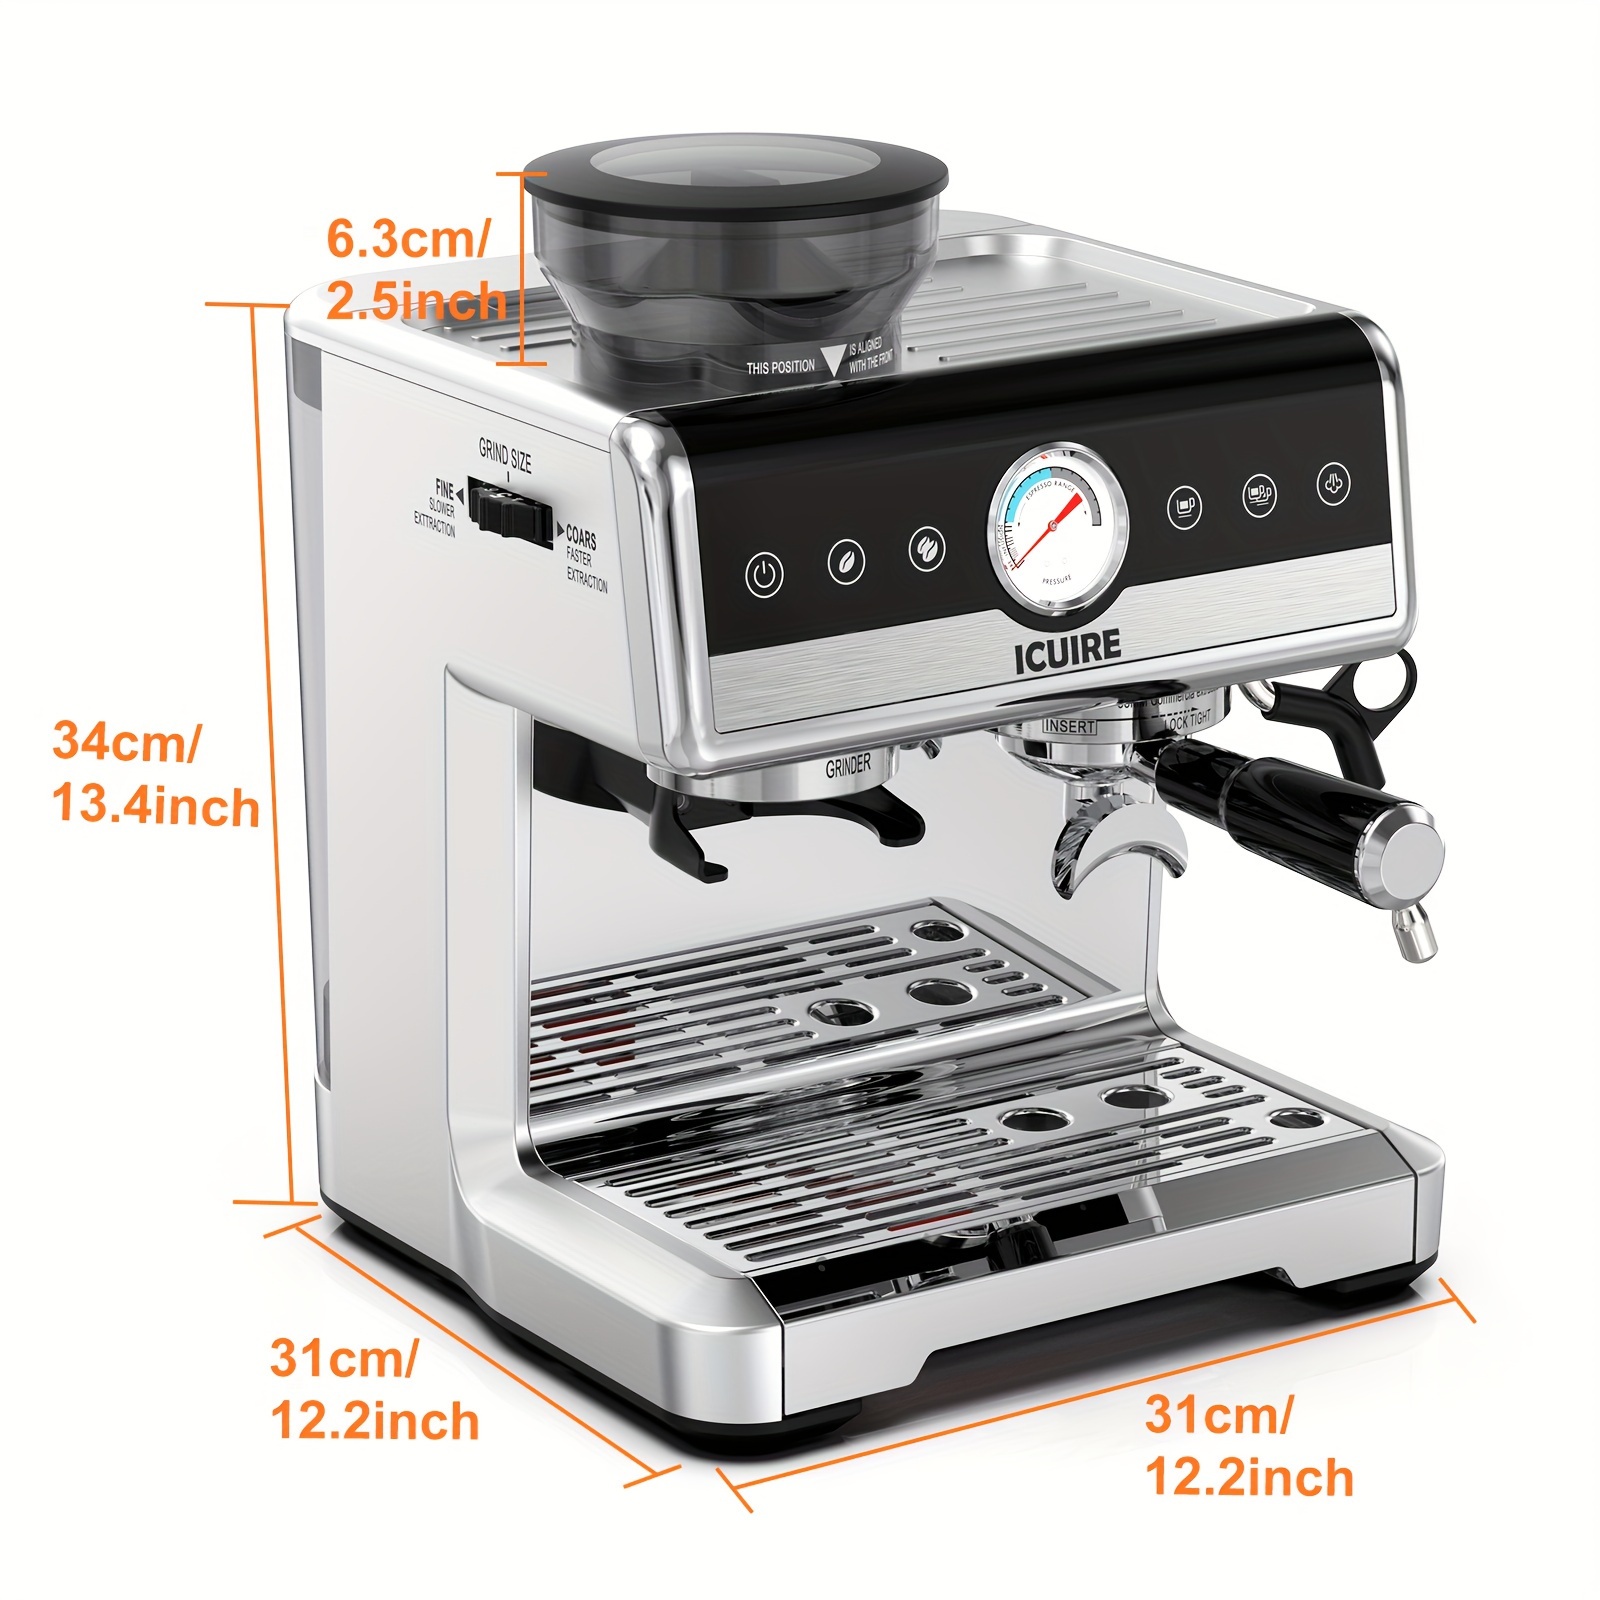 Commercial Coffee Machines & Makers